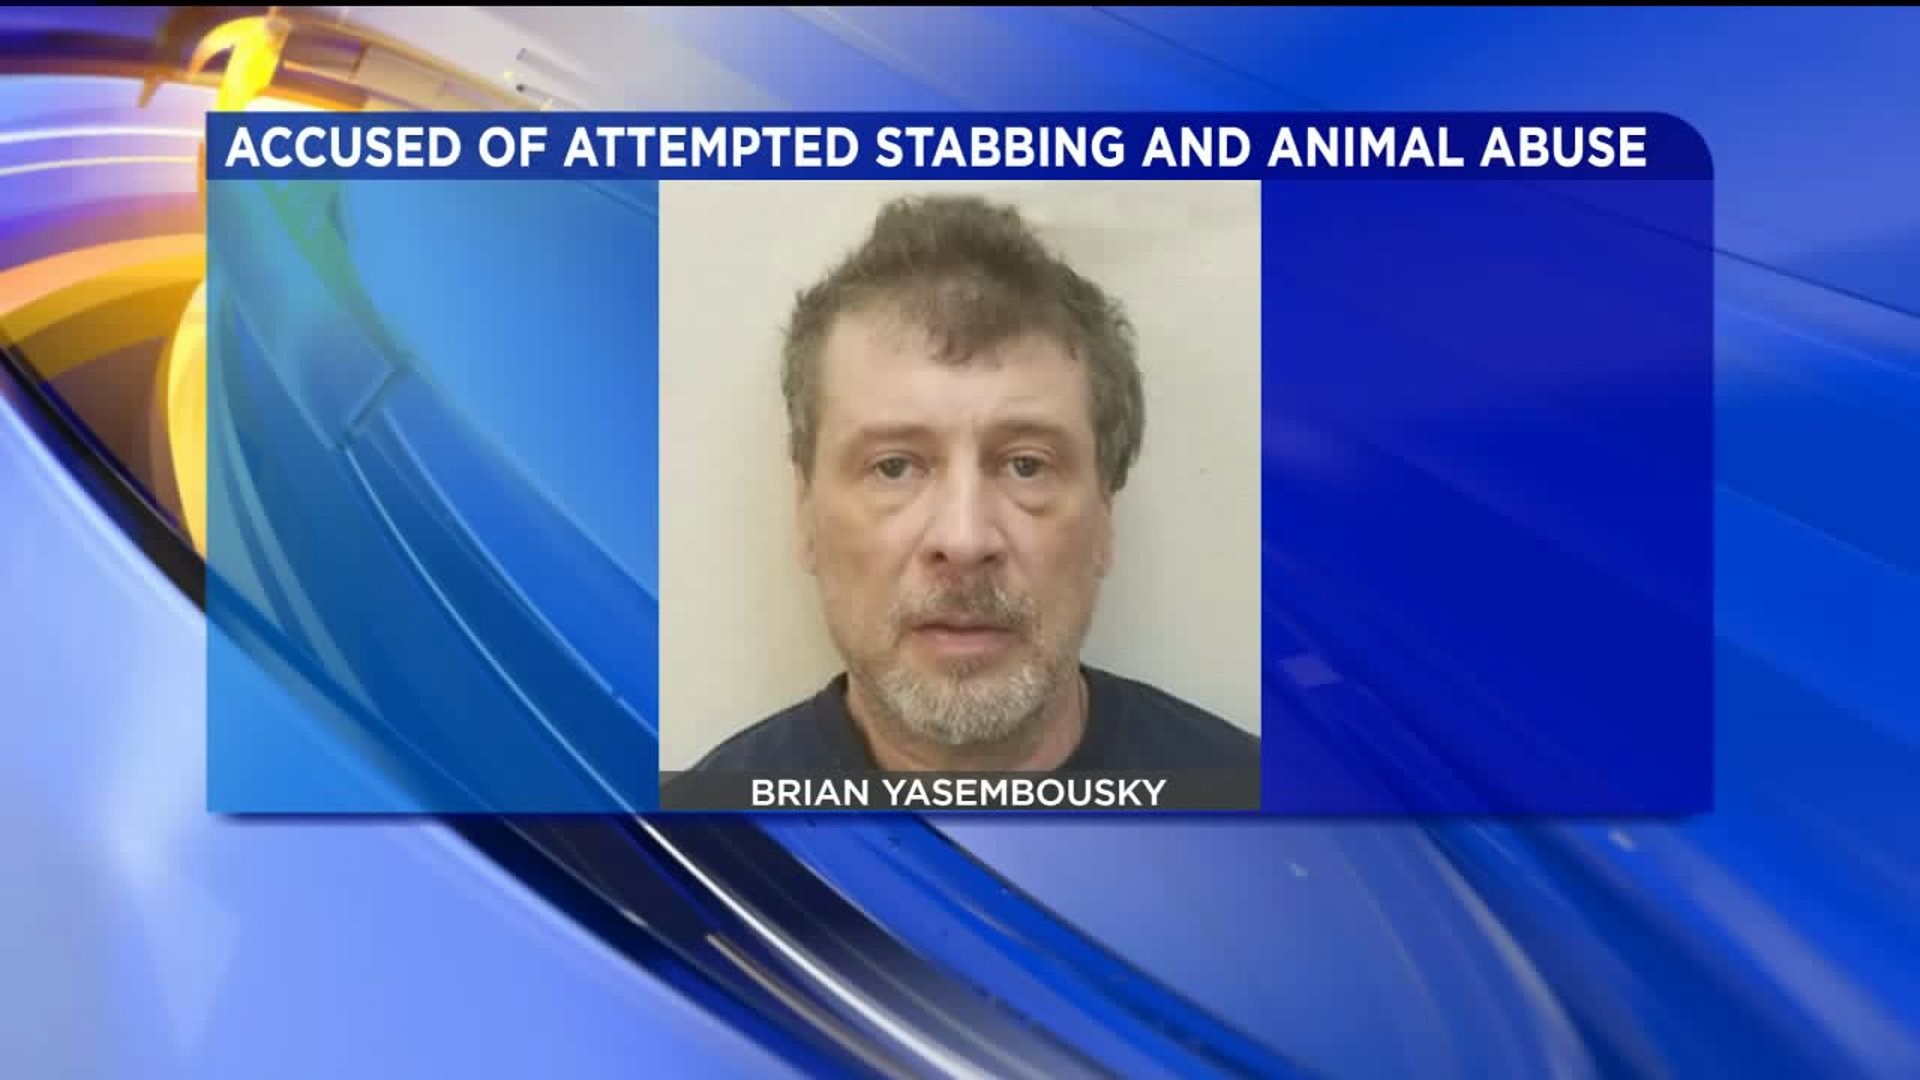 Schuylkill County Man Accused of Attempted Assault, Animal Cruelty